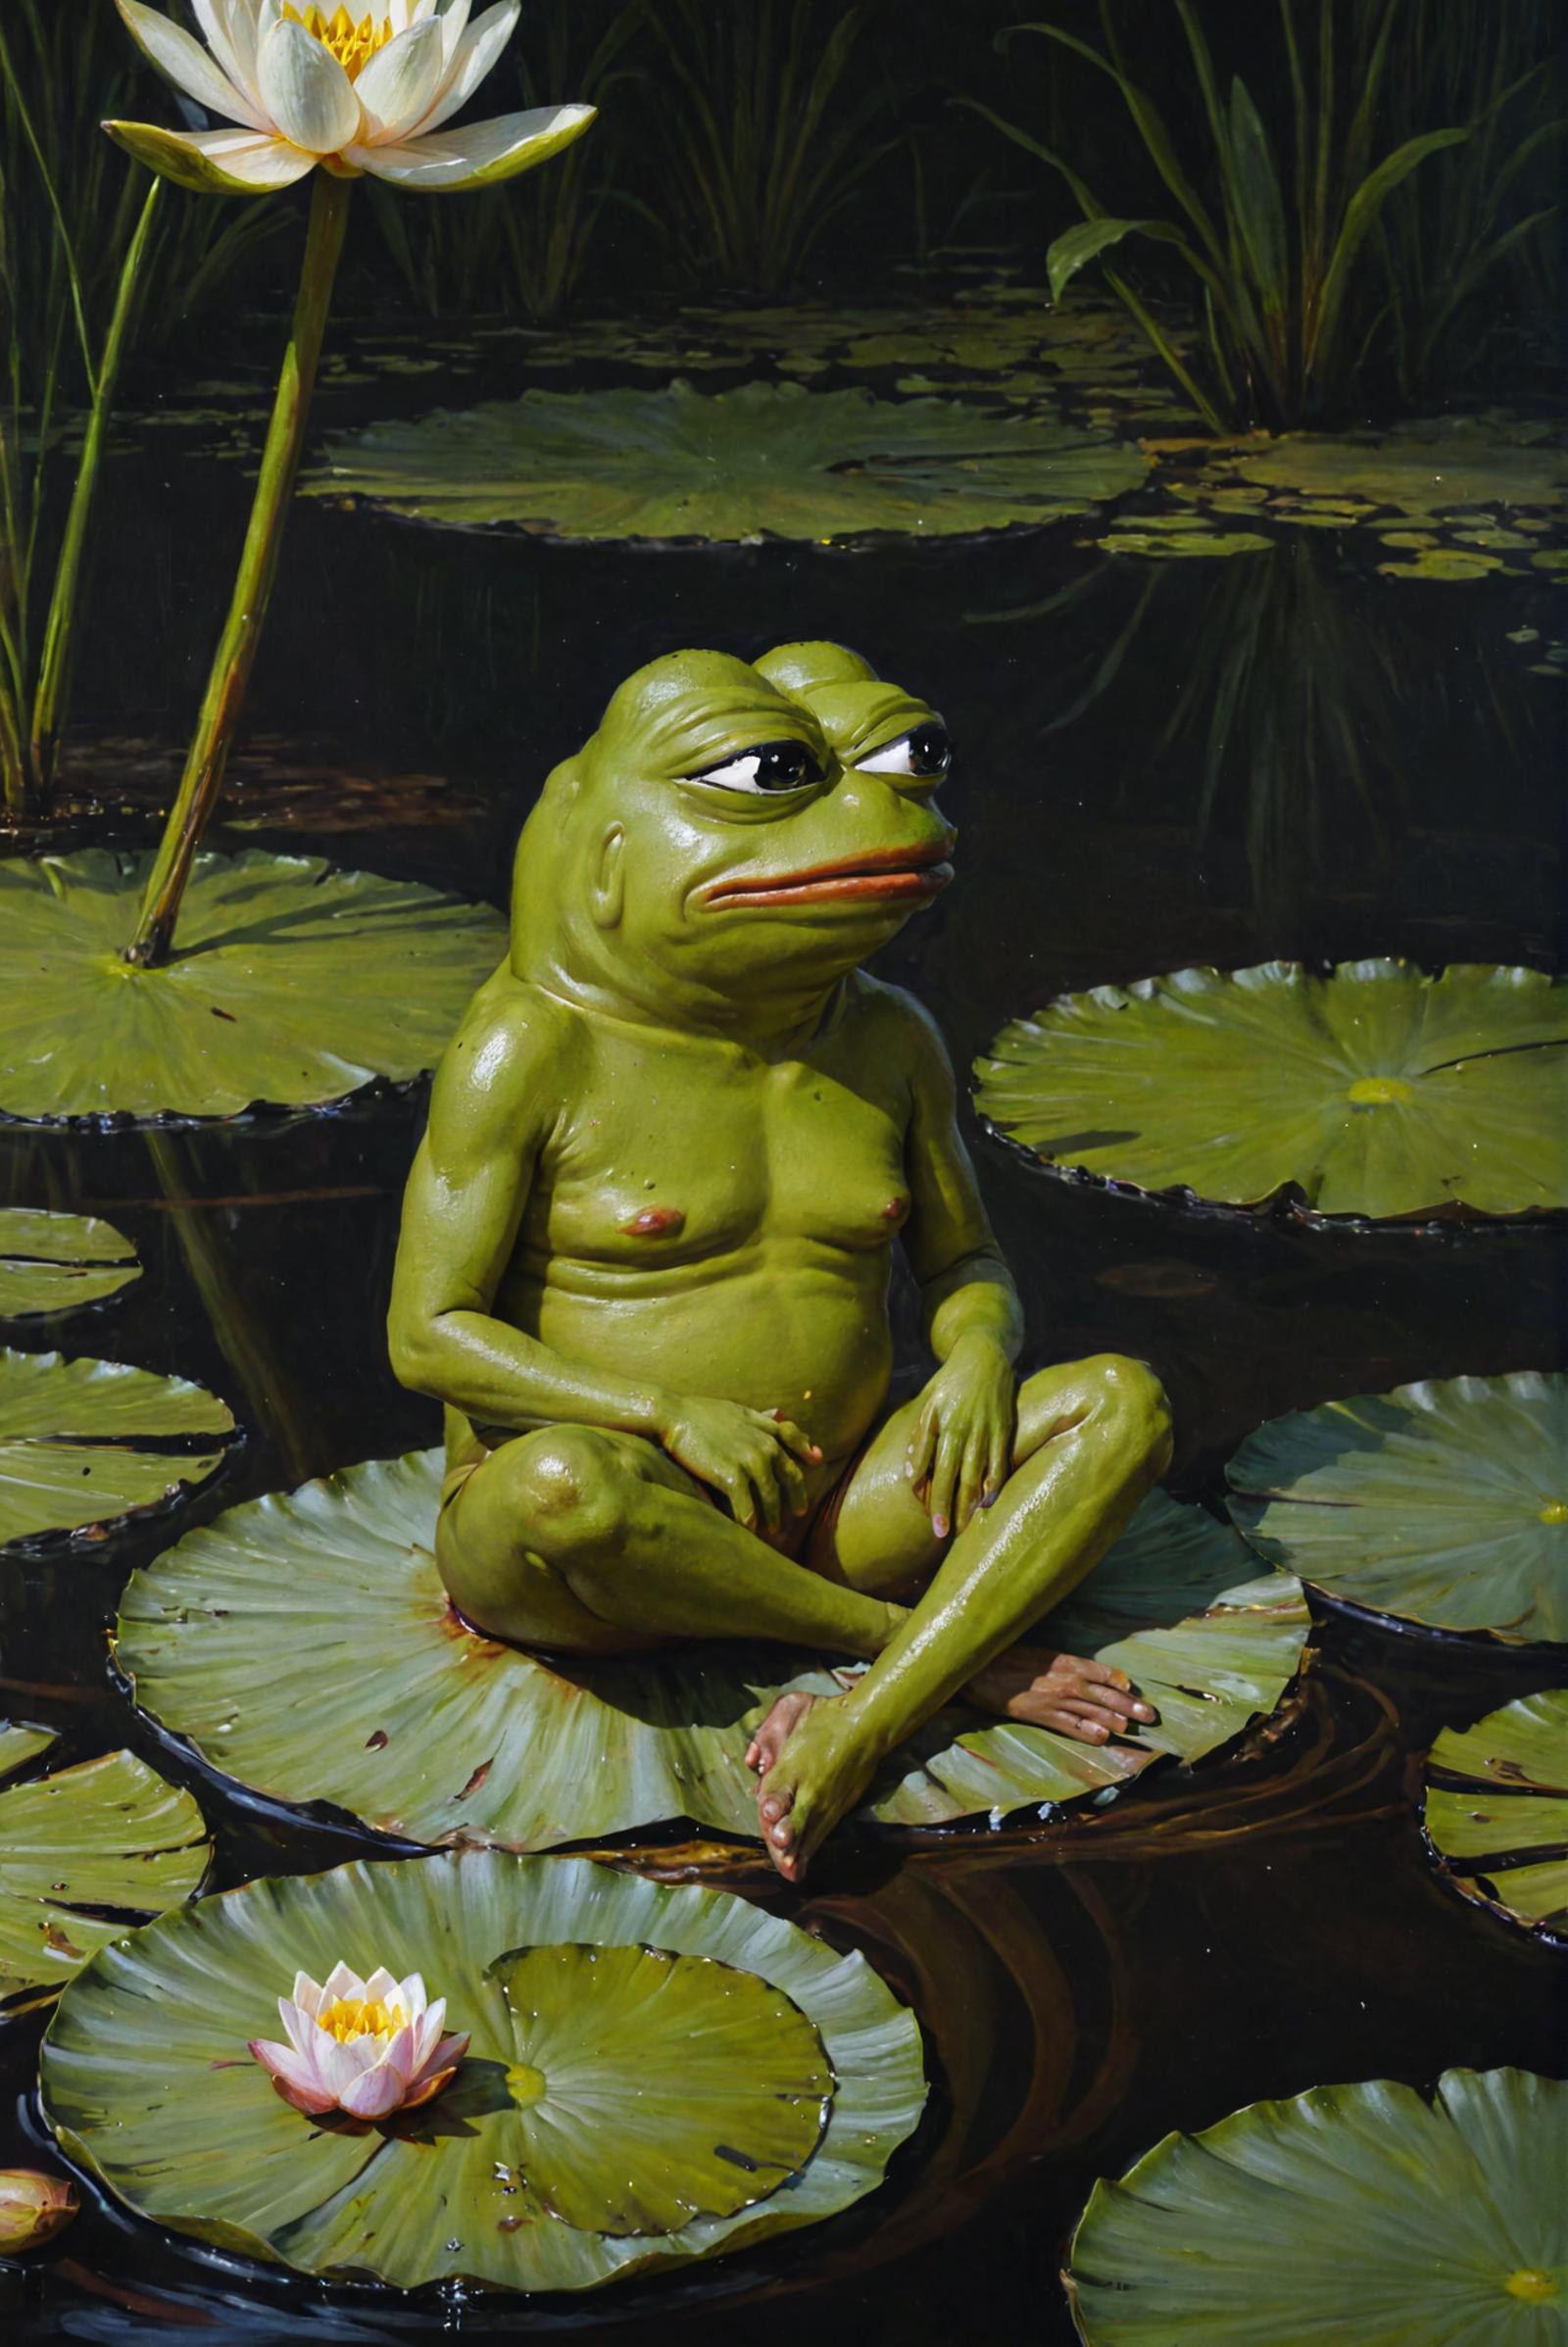 A frog with a face painted as a frog sitting on a lily pad.